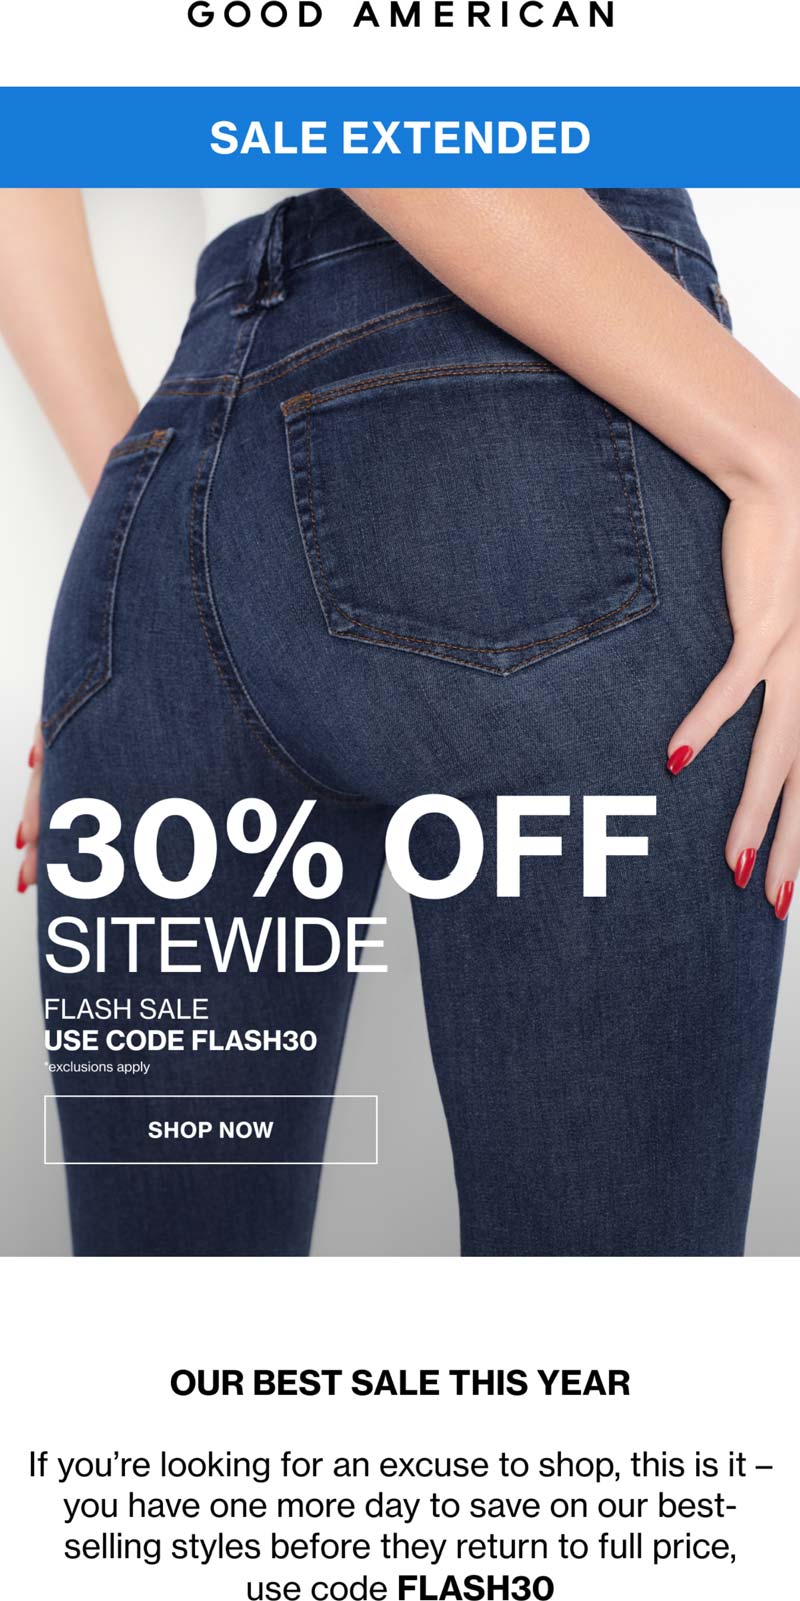 Good American stores Coupon  30% off everything online today at Good American via promo code FLASH30 #goodamerican 